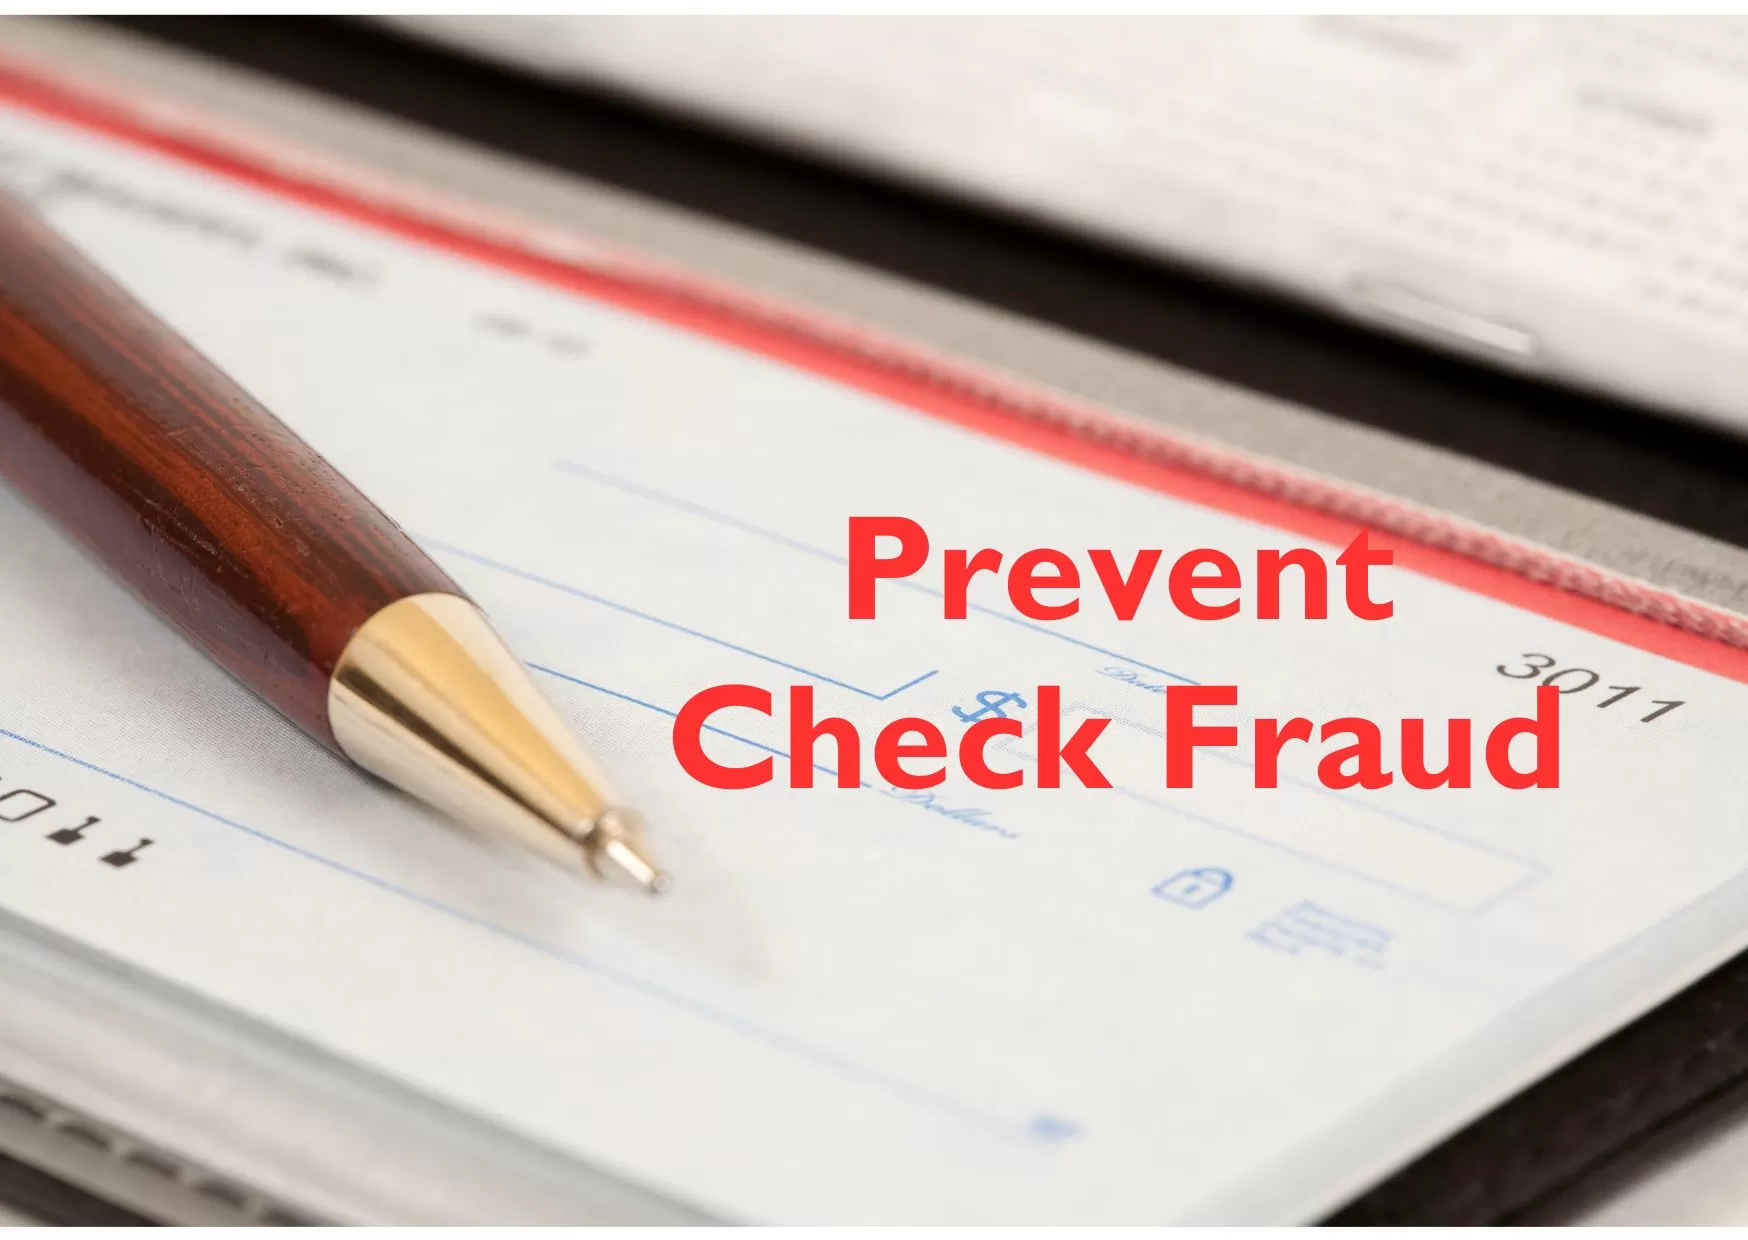 Checkbook with text overlay: Prevent Check Fraud